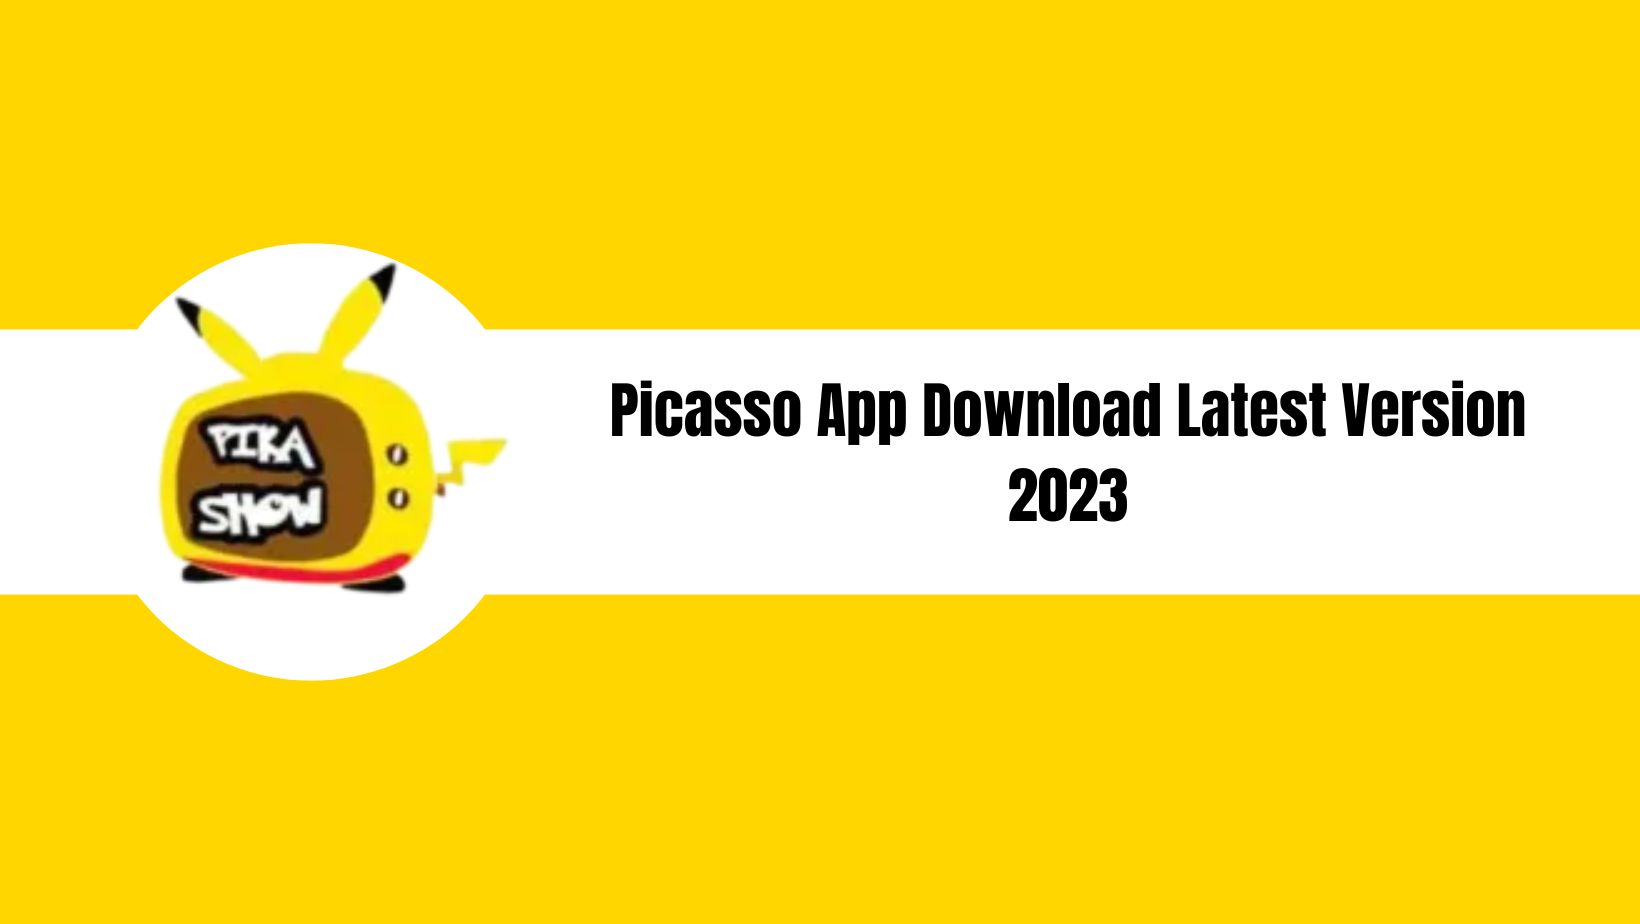 Picasso App Download